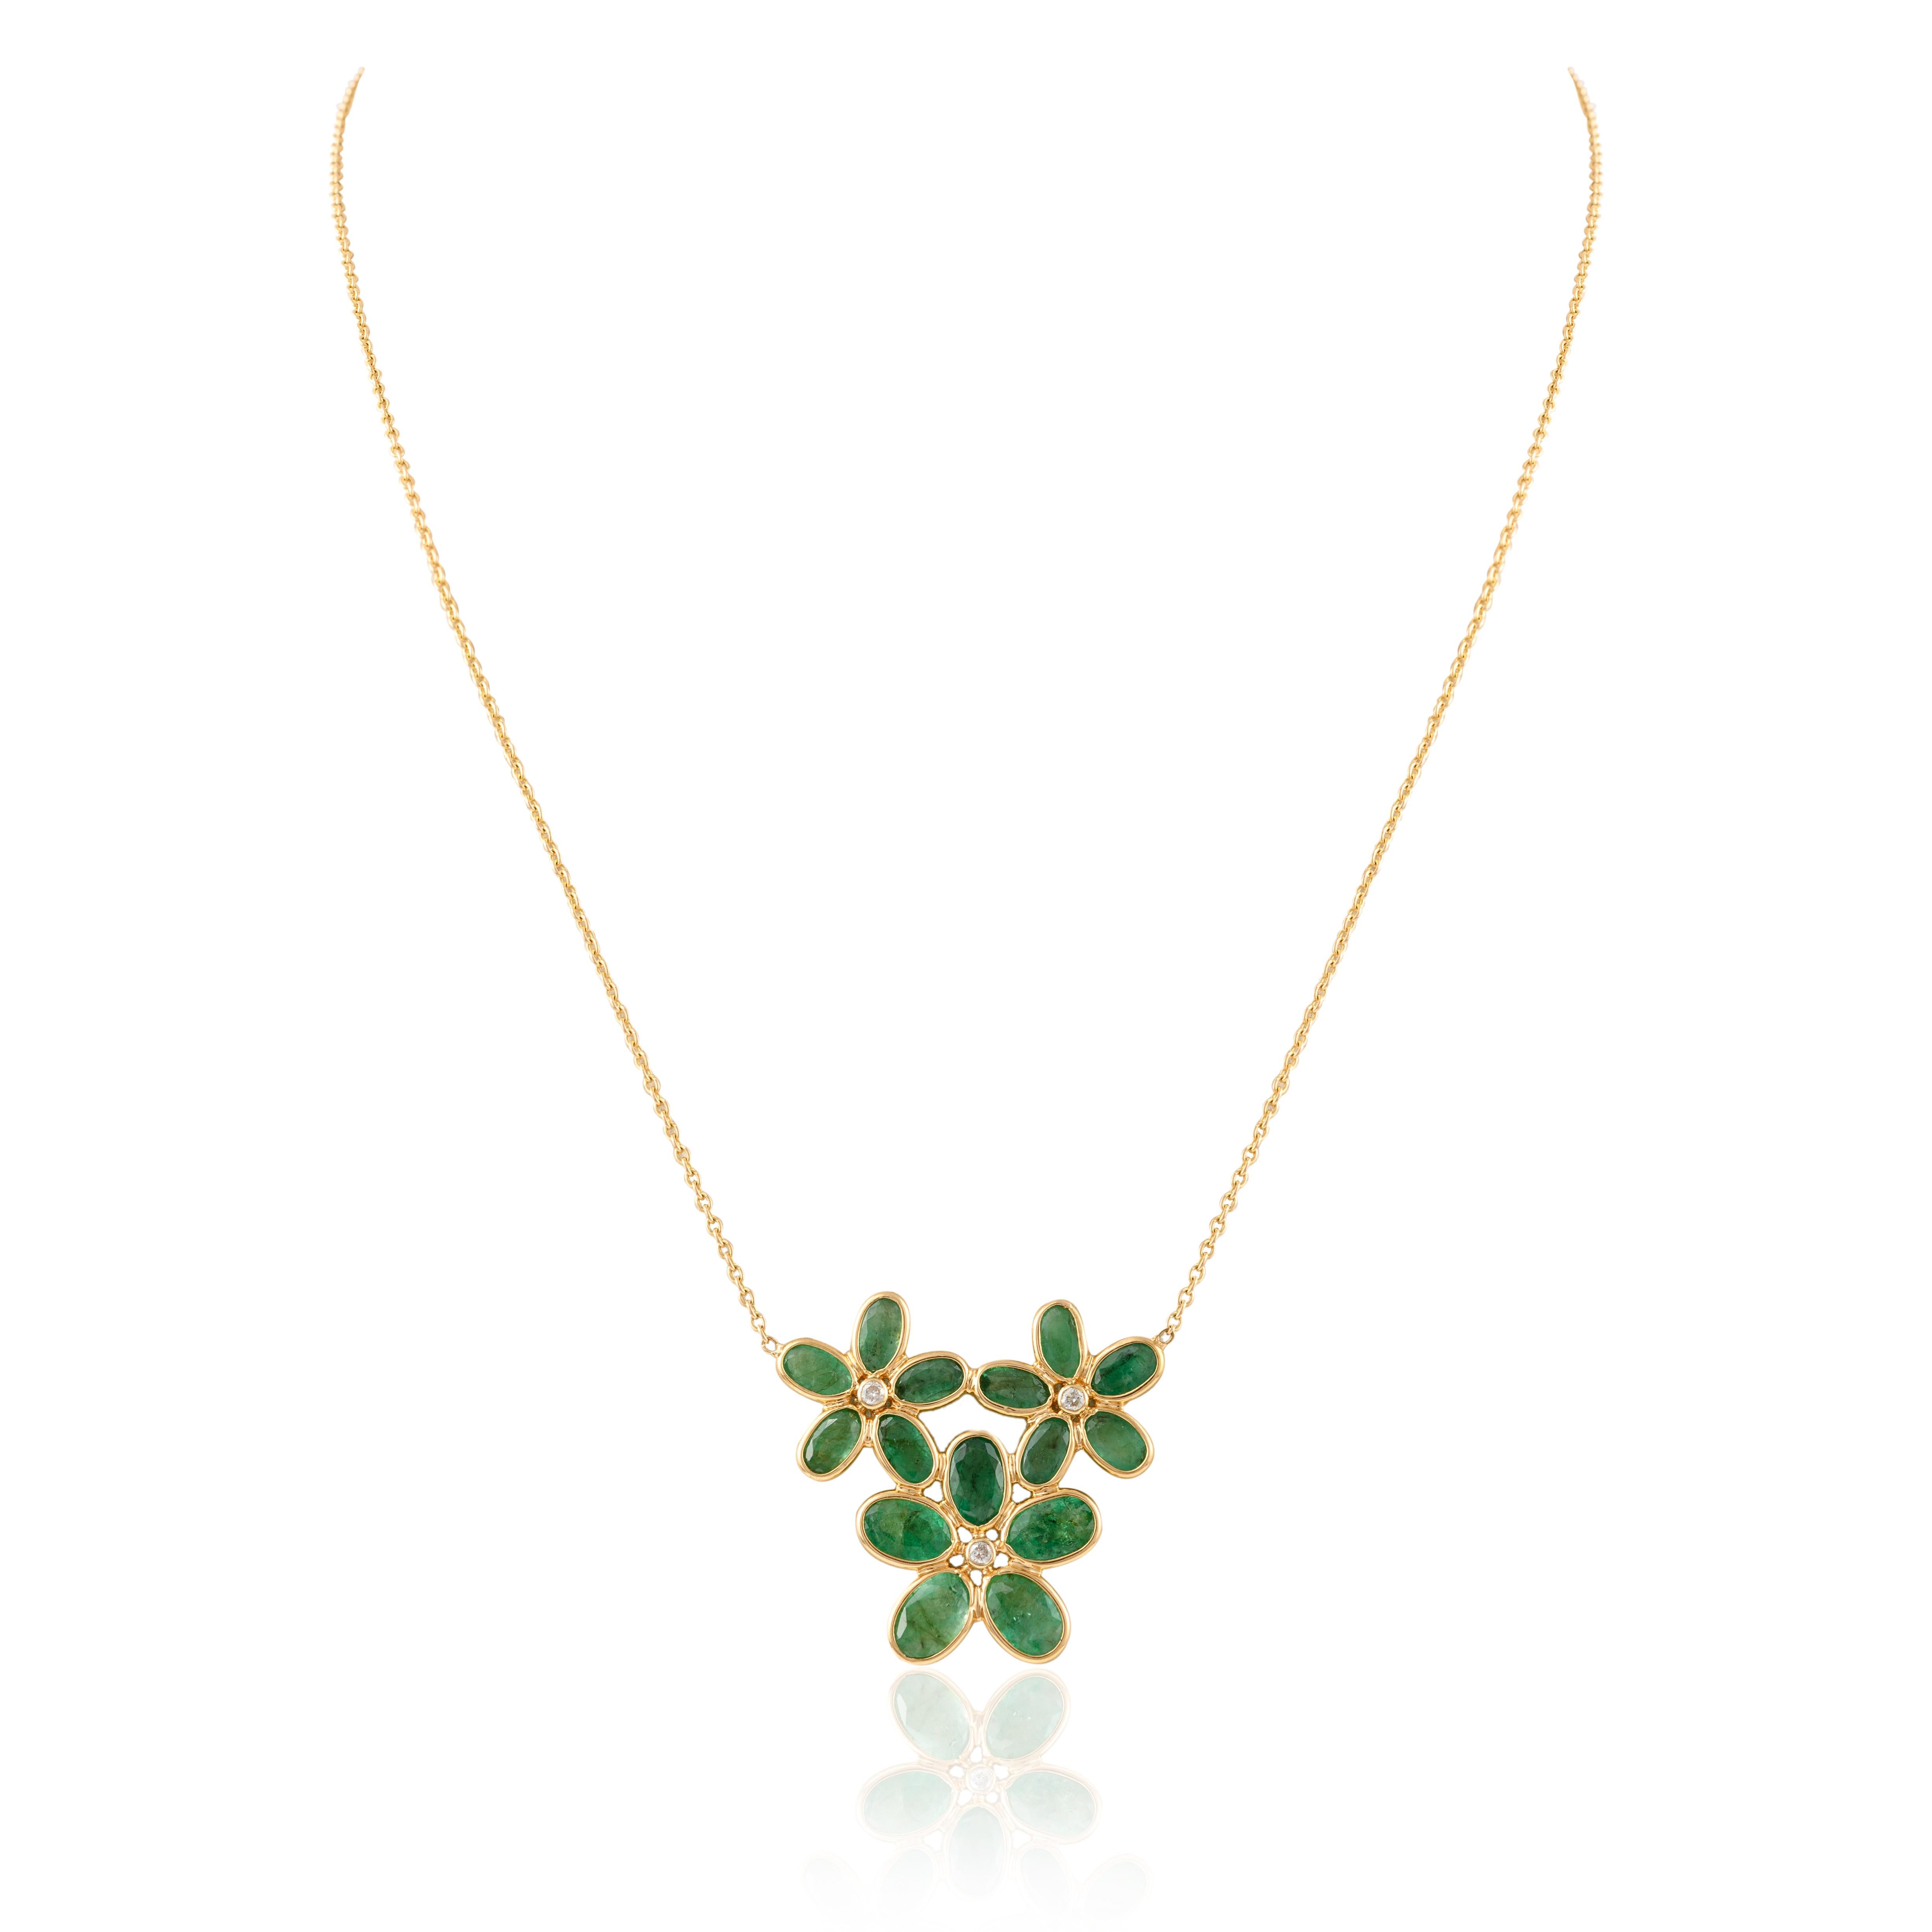 Women's Natural Diamond Emerald Flower Necklace 18k Yellow Gold, Christmas Gifts For Her For Sale